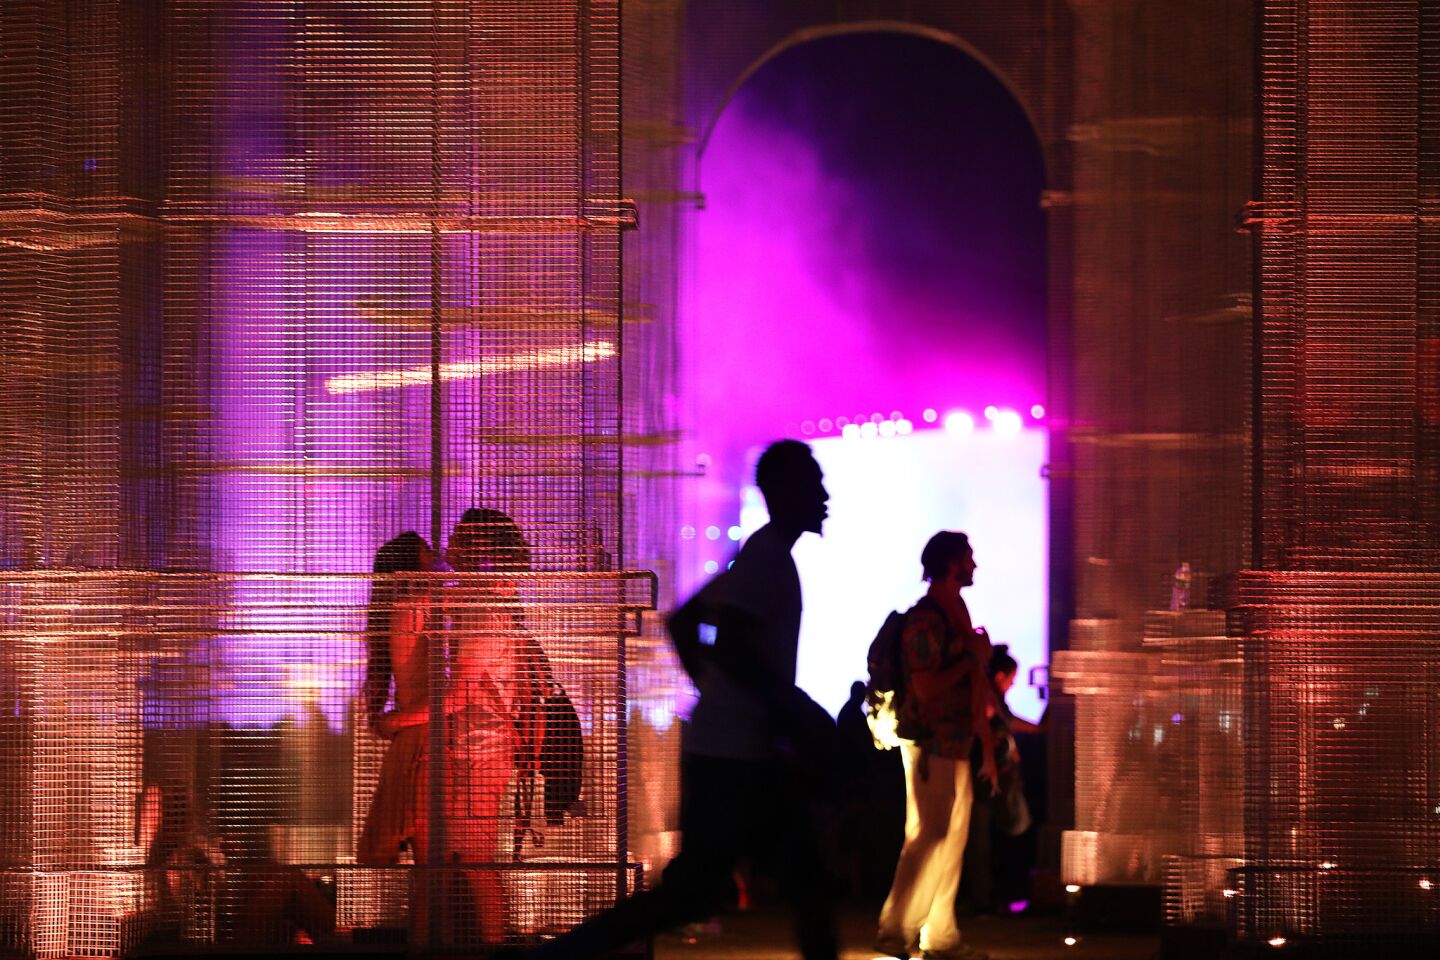 Fans found ample room at the art installations, including the Etherea, during Beyonce's performance.